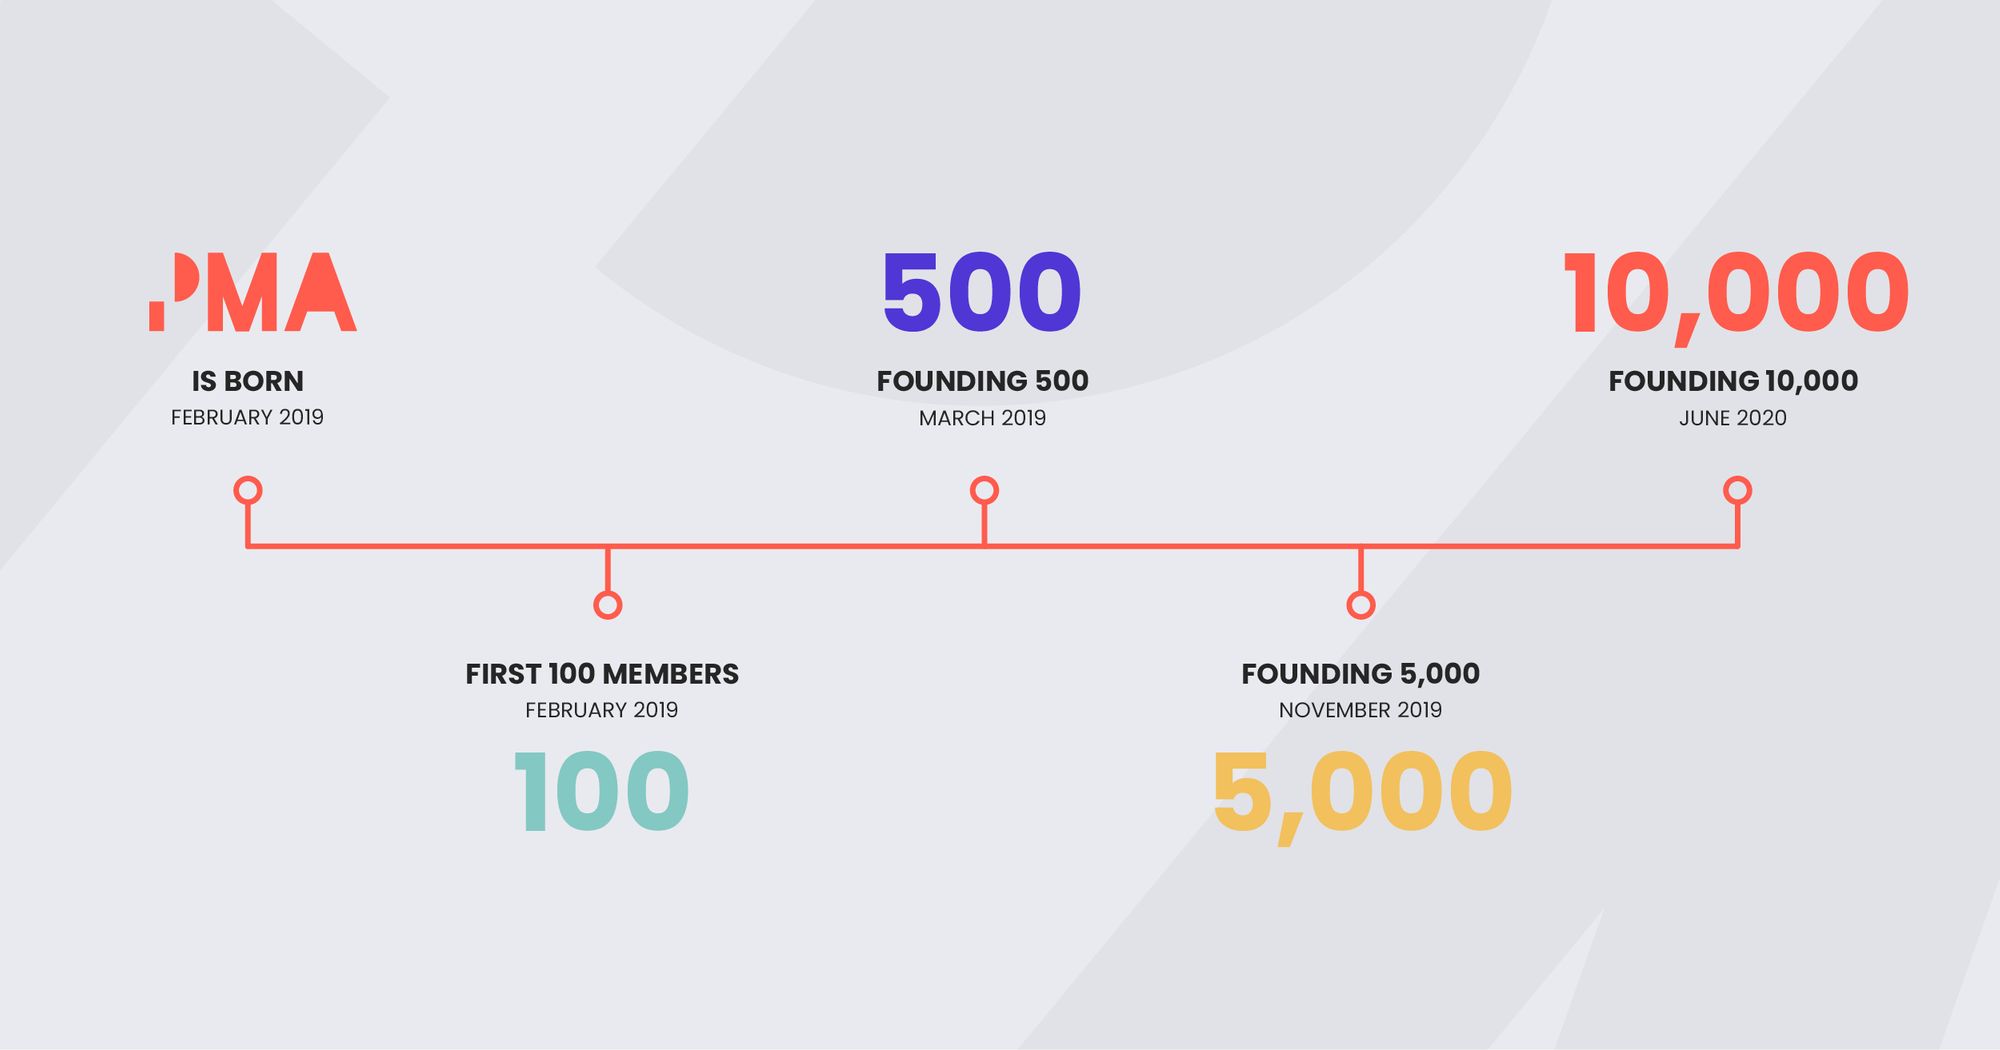 Product Marketing Alliance are thrilled to announce we hit 10,000 founding members in 2020.